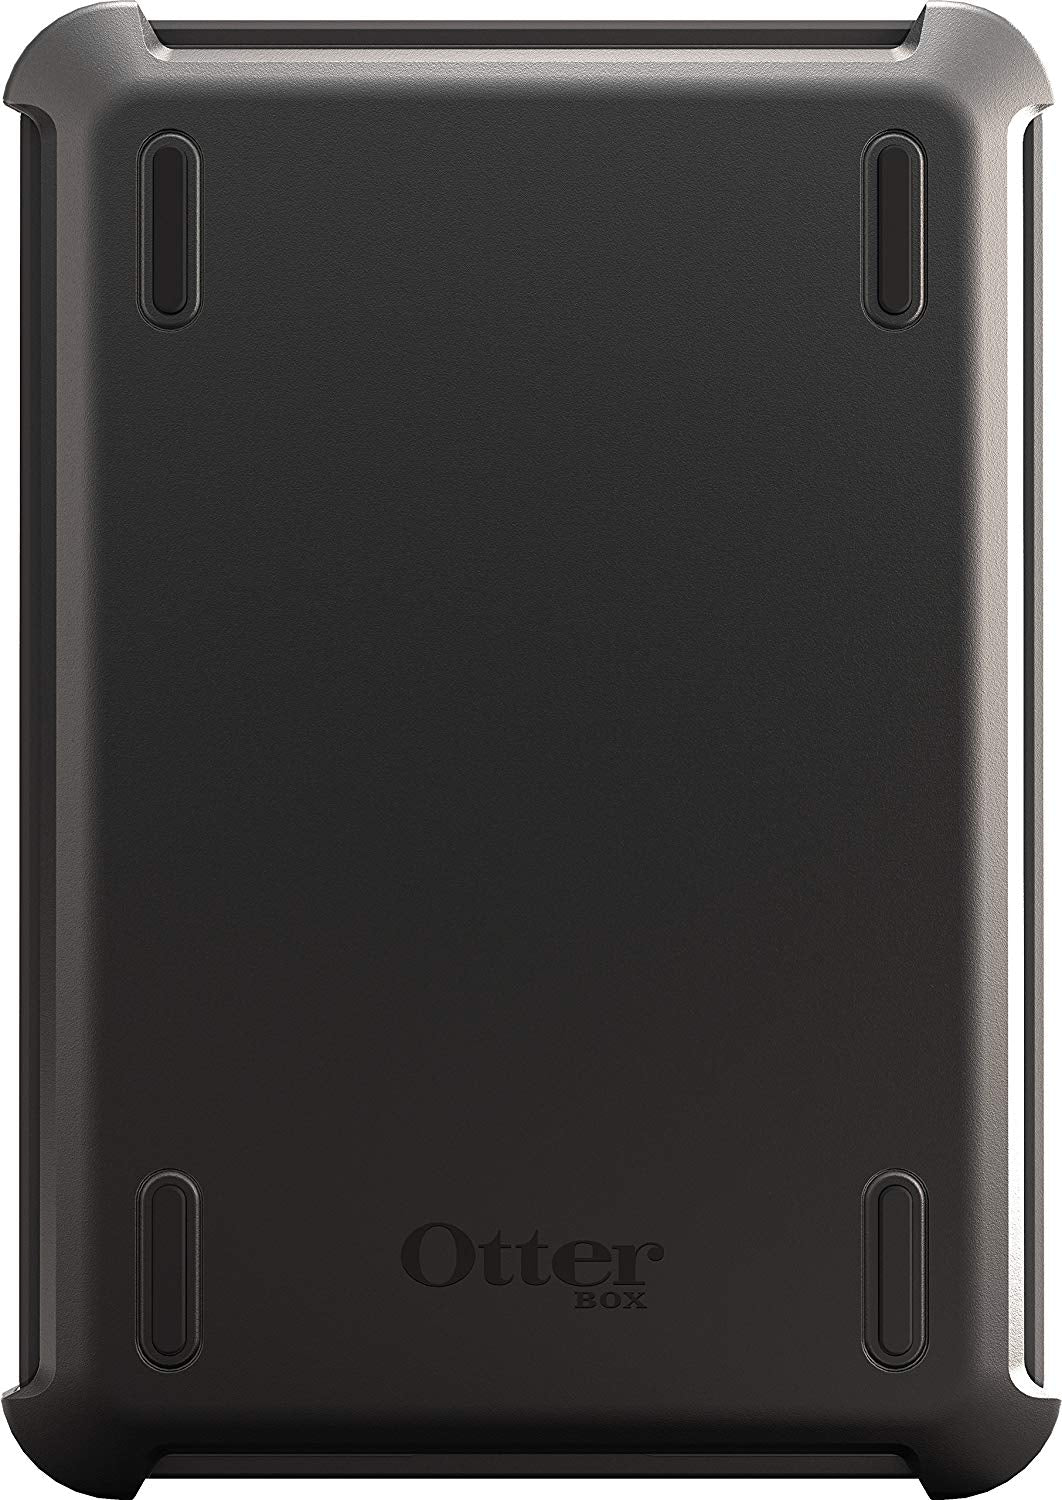 OtterBox DEFENDER SERIES Case for Samsung Galaxy Tab A 9.7 - Black (Certified Refurbished)